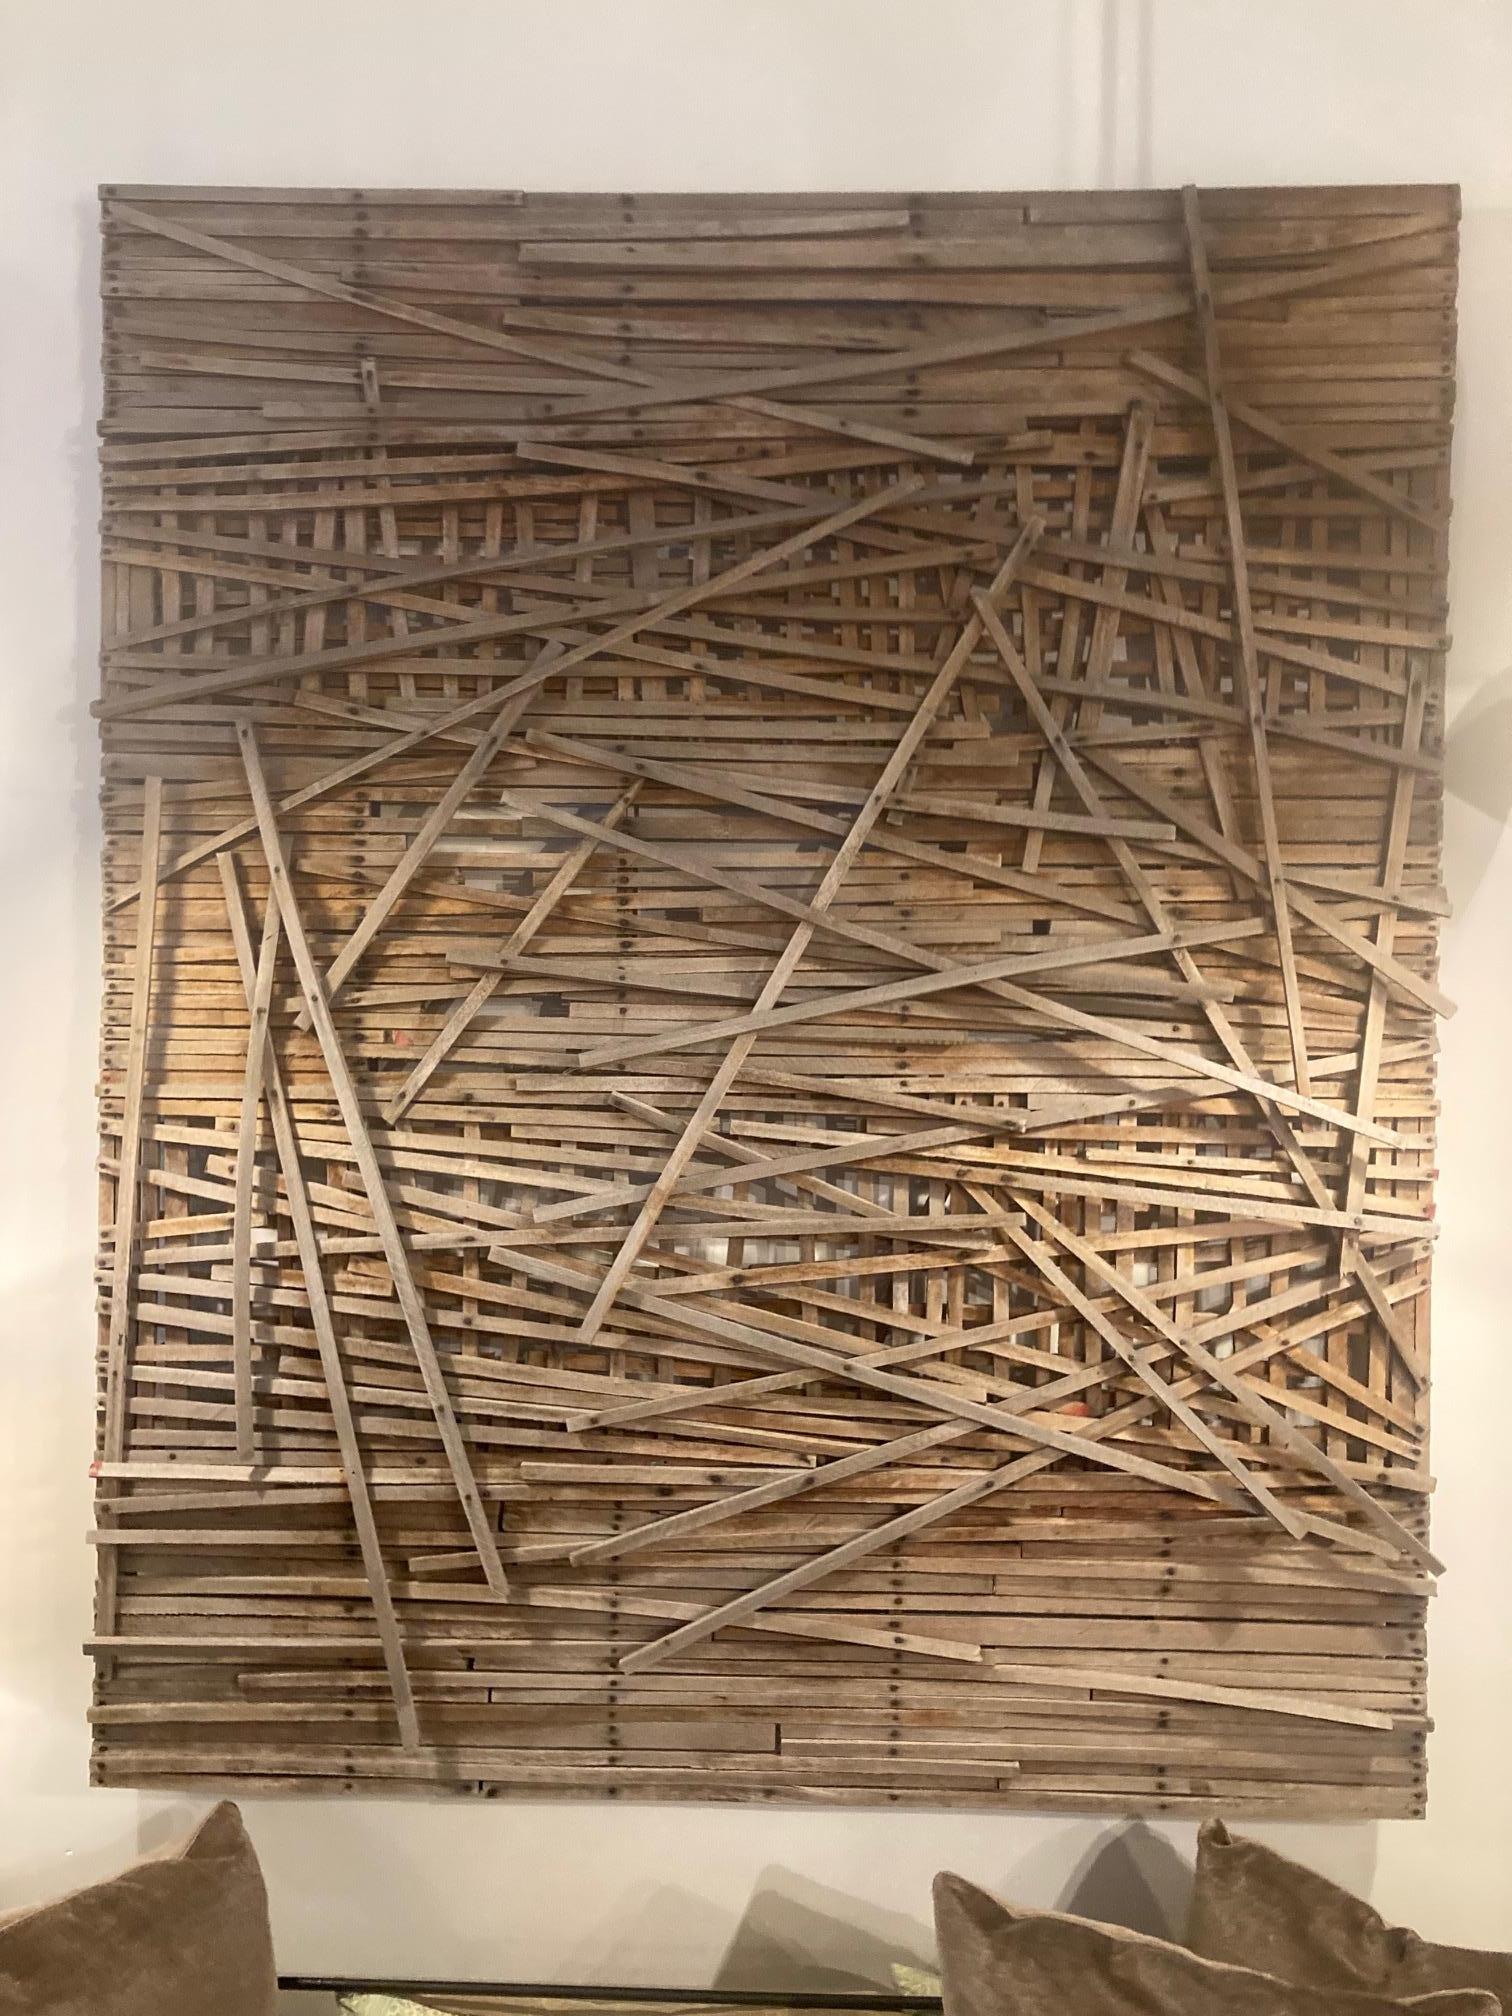 Ahren Ahrenholz
African hardwood & steel nails, 2019
Edition of 1
Weathered wall sculpture made from African hardwood and steel nails with accents of paint. 

Taking residence in the hills Vermont, Ahren creates a unique visual language using